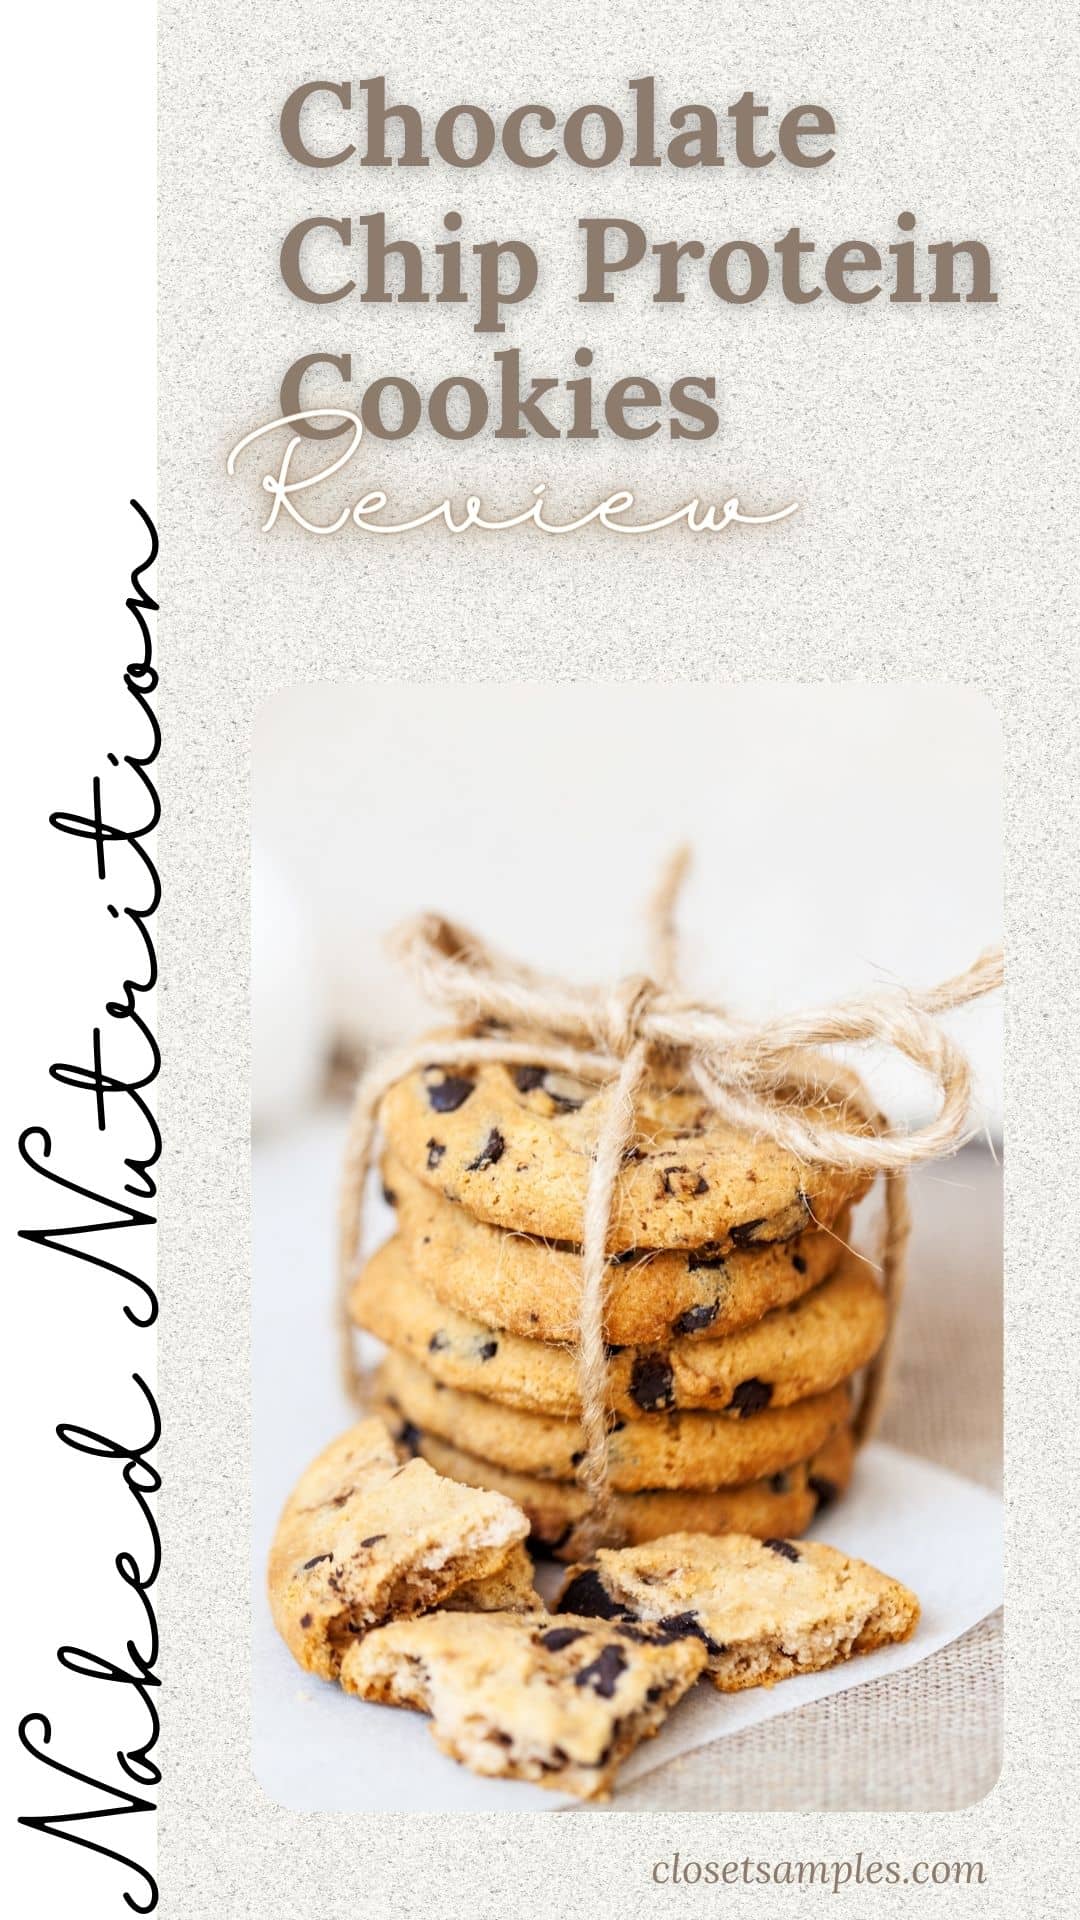 Naked Nutrition Chocolate Chip Protein Cookies Review Closetsamples Pinterest